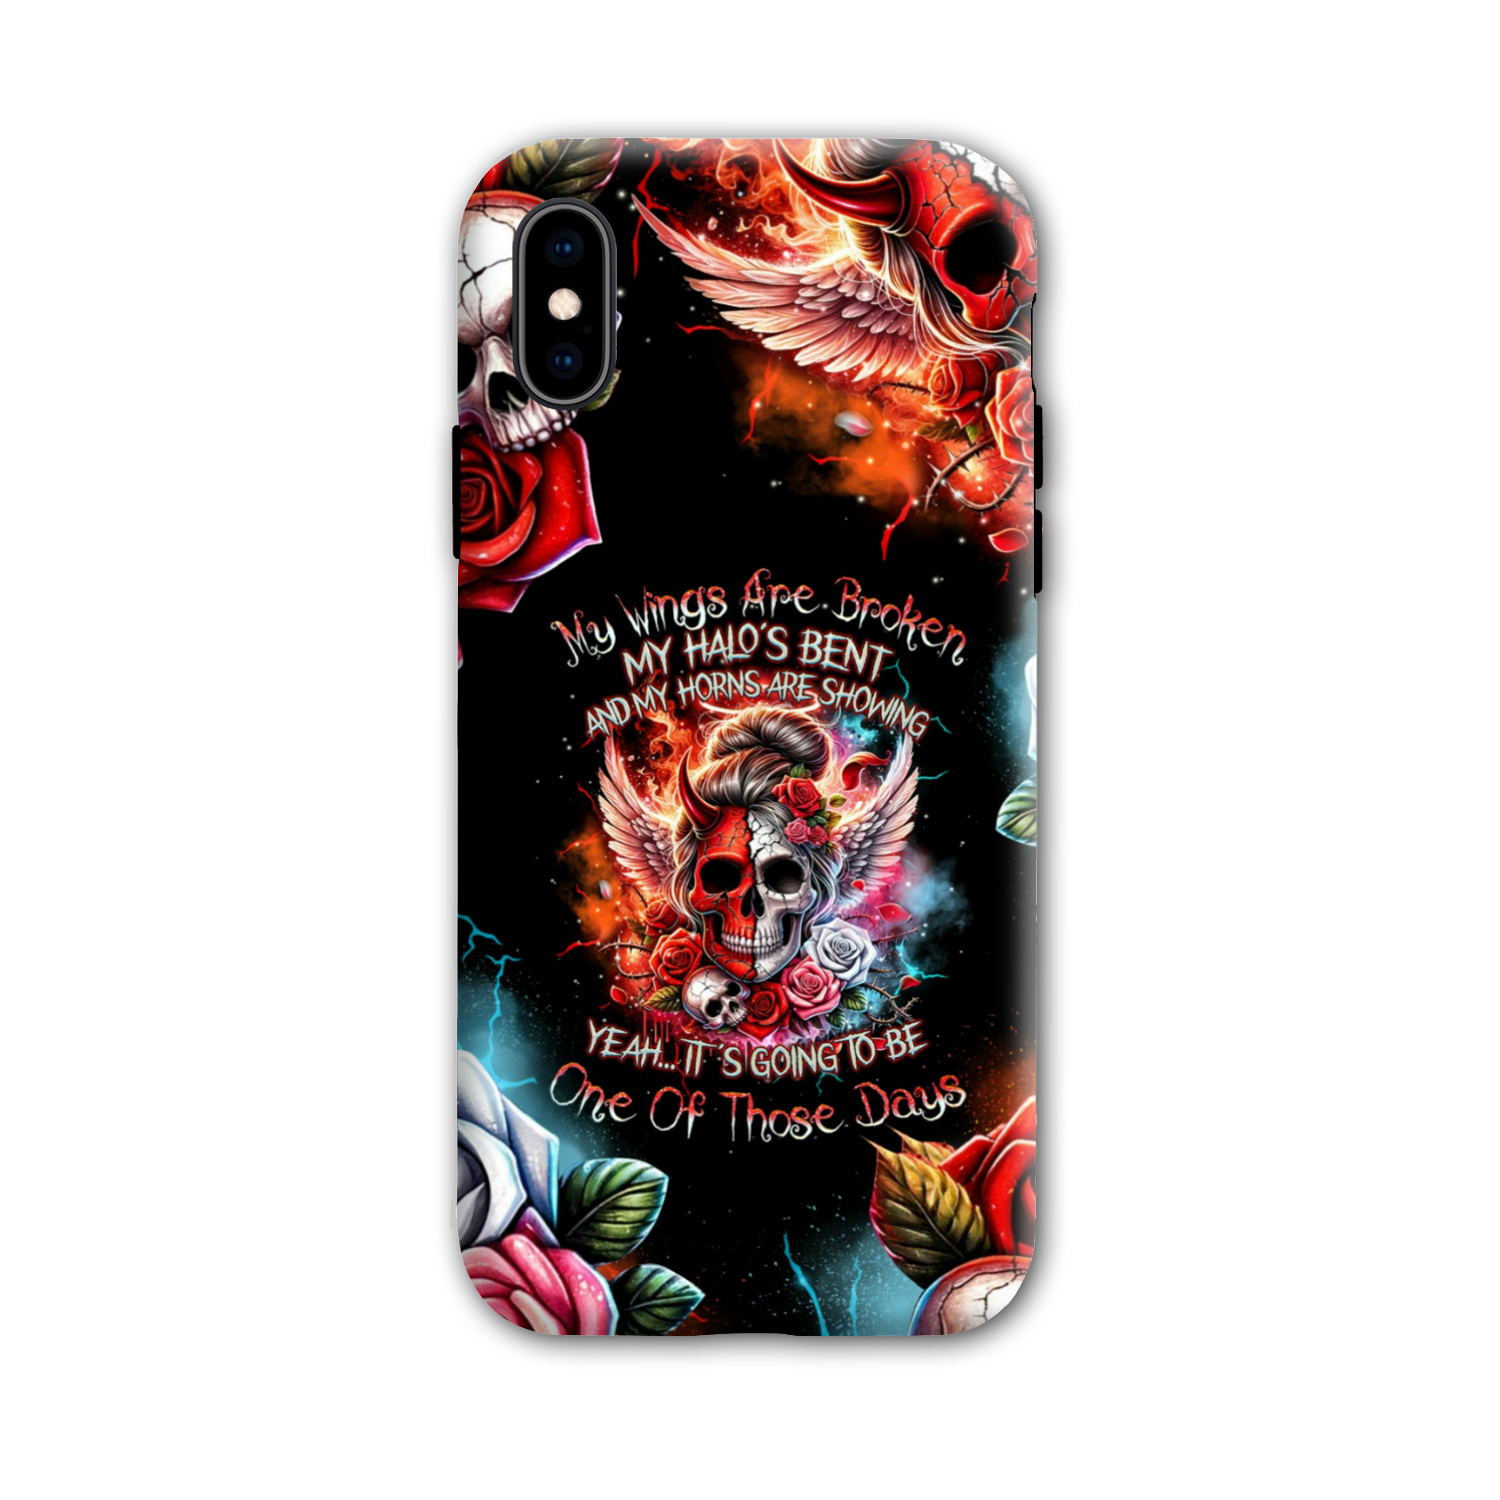 IT'S GOING TO BE ONE OF THOSE DAYS PHONE CASE - TYQY2703244